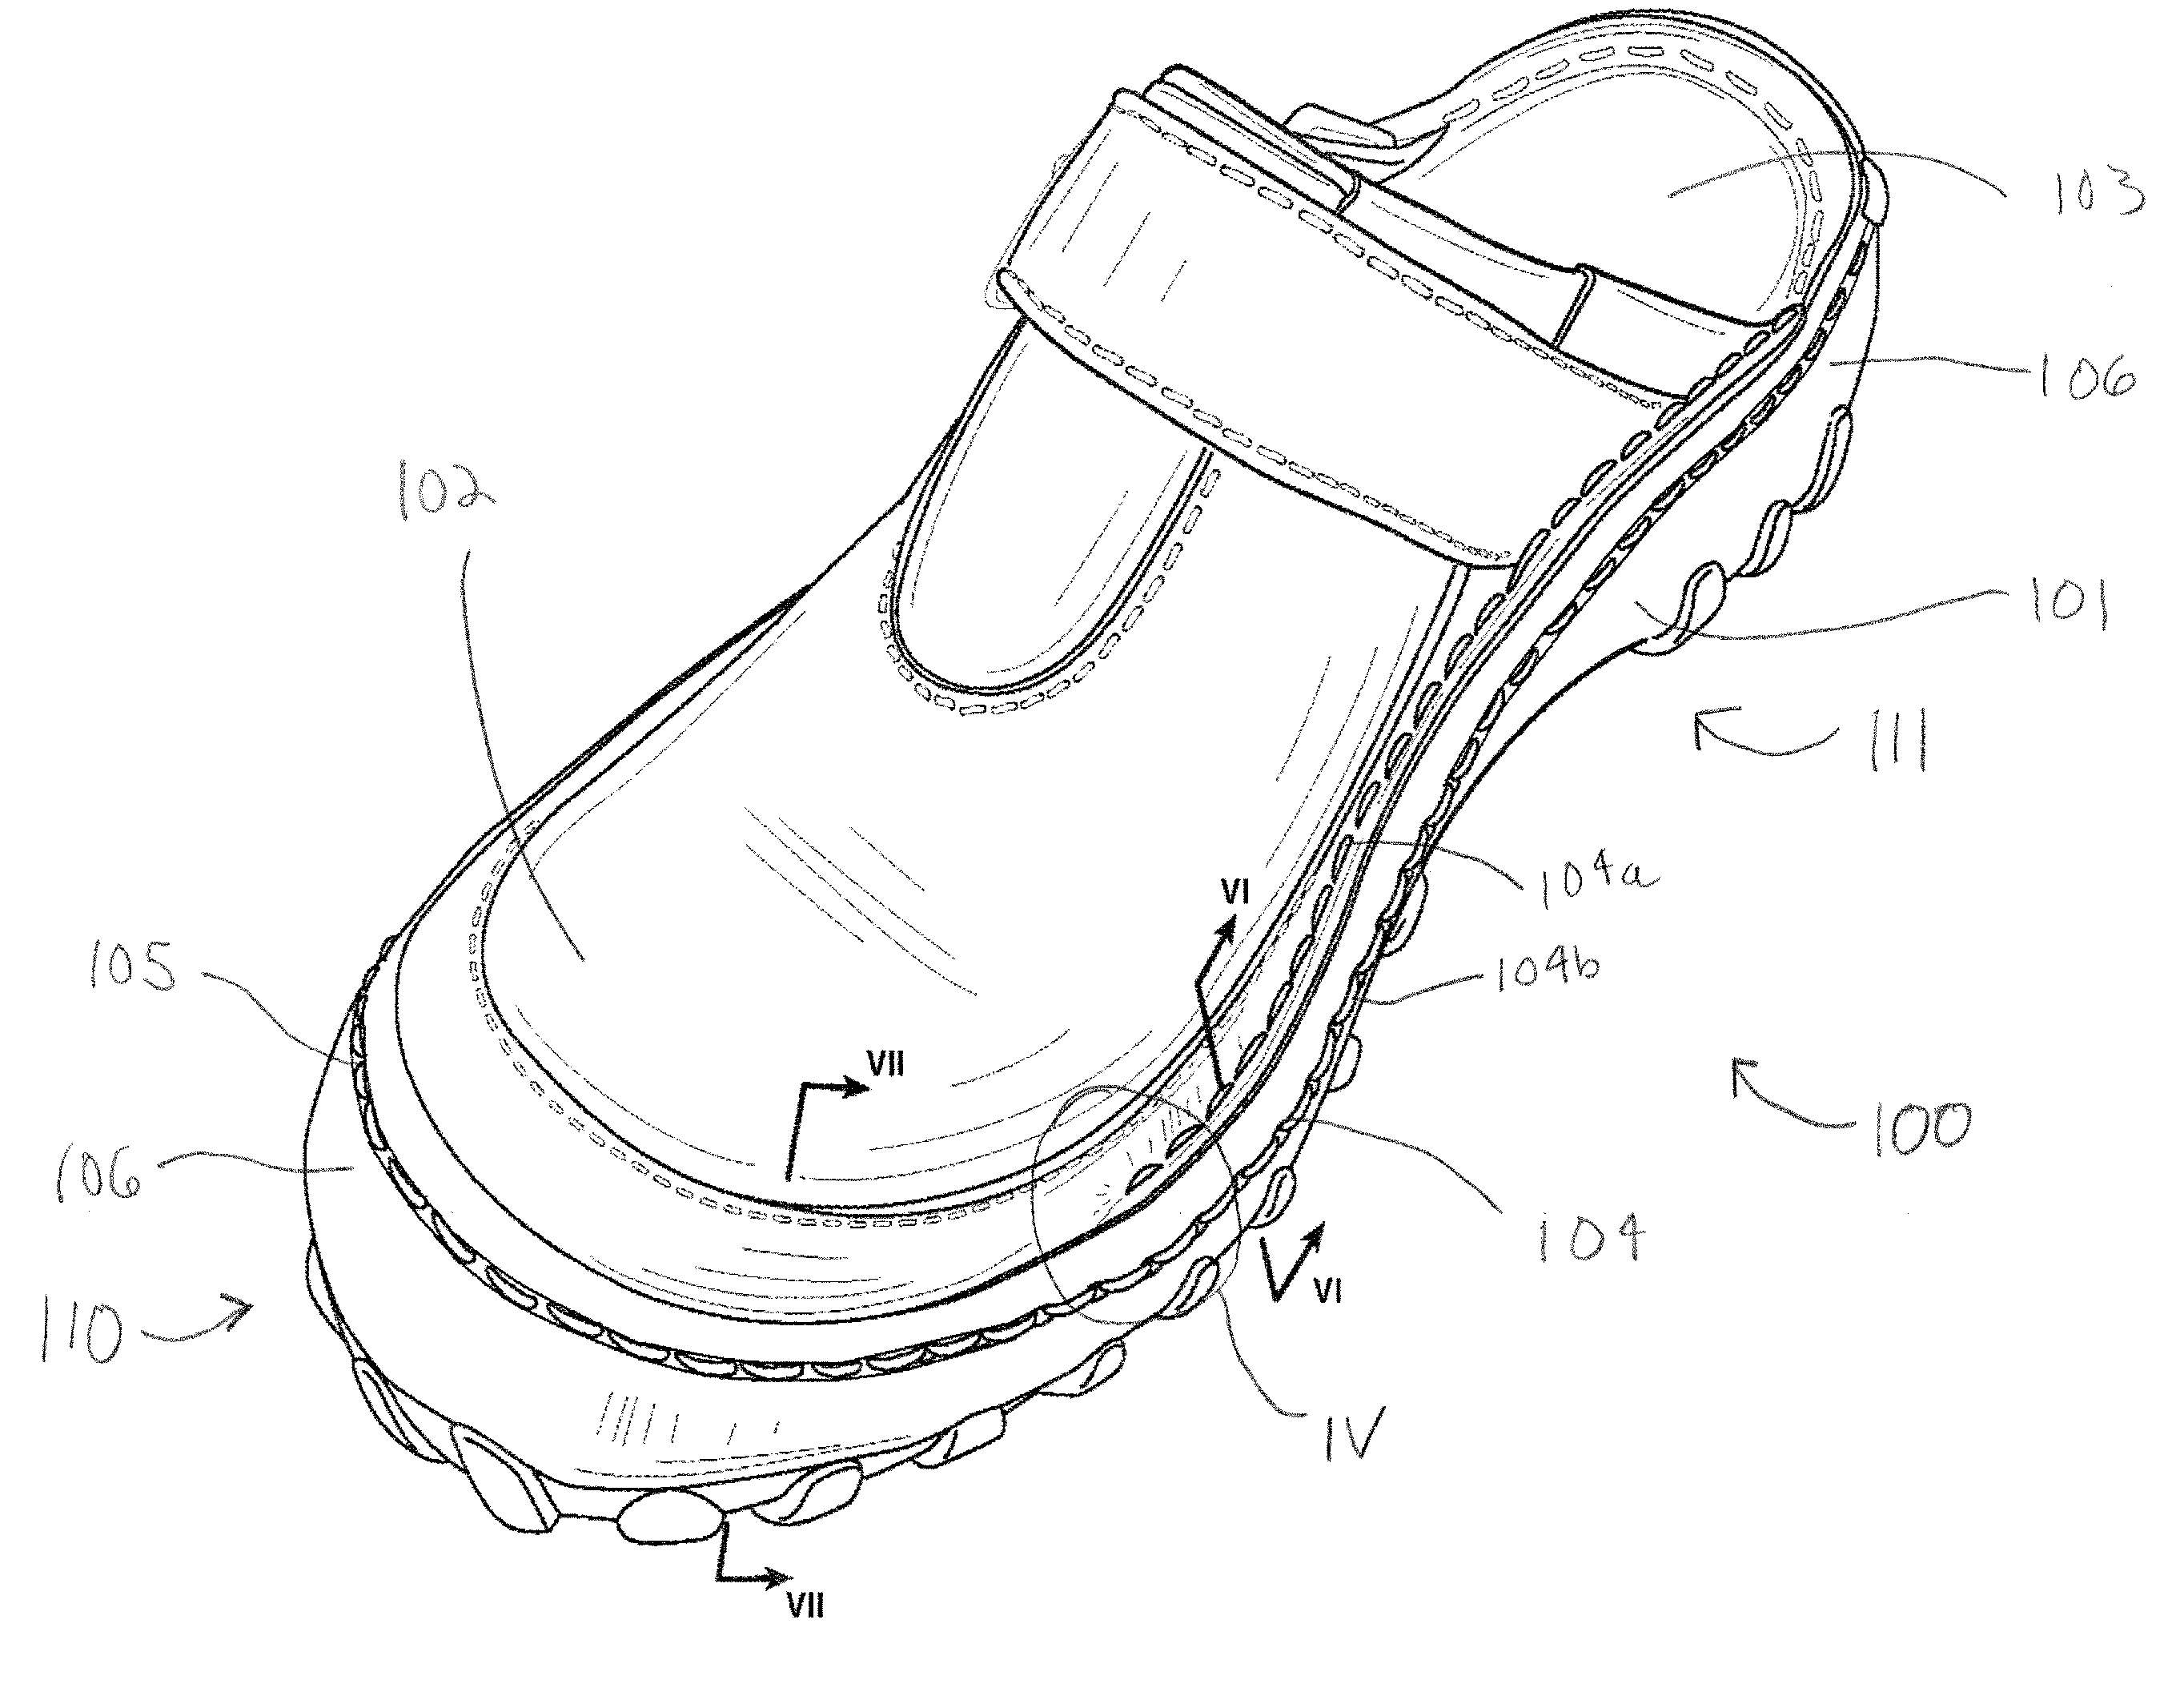 Shoe With Improved Construction